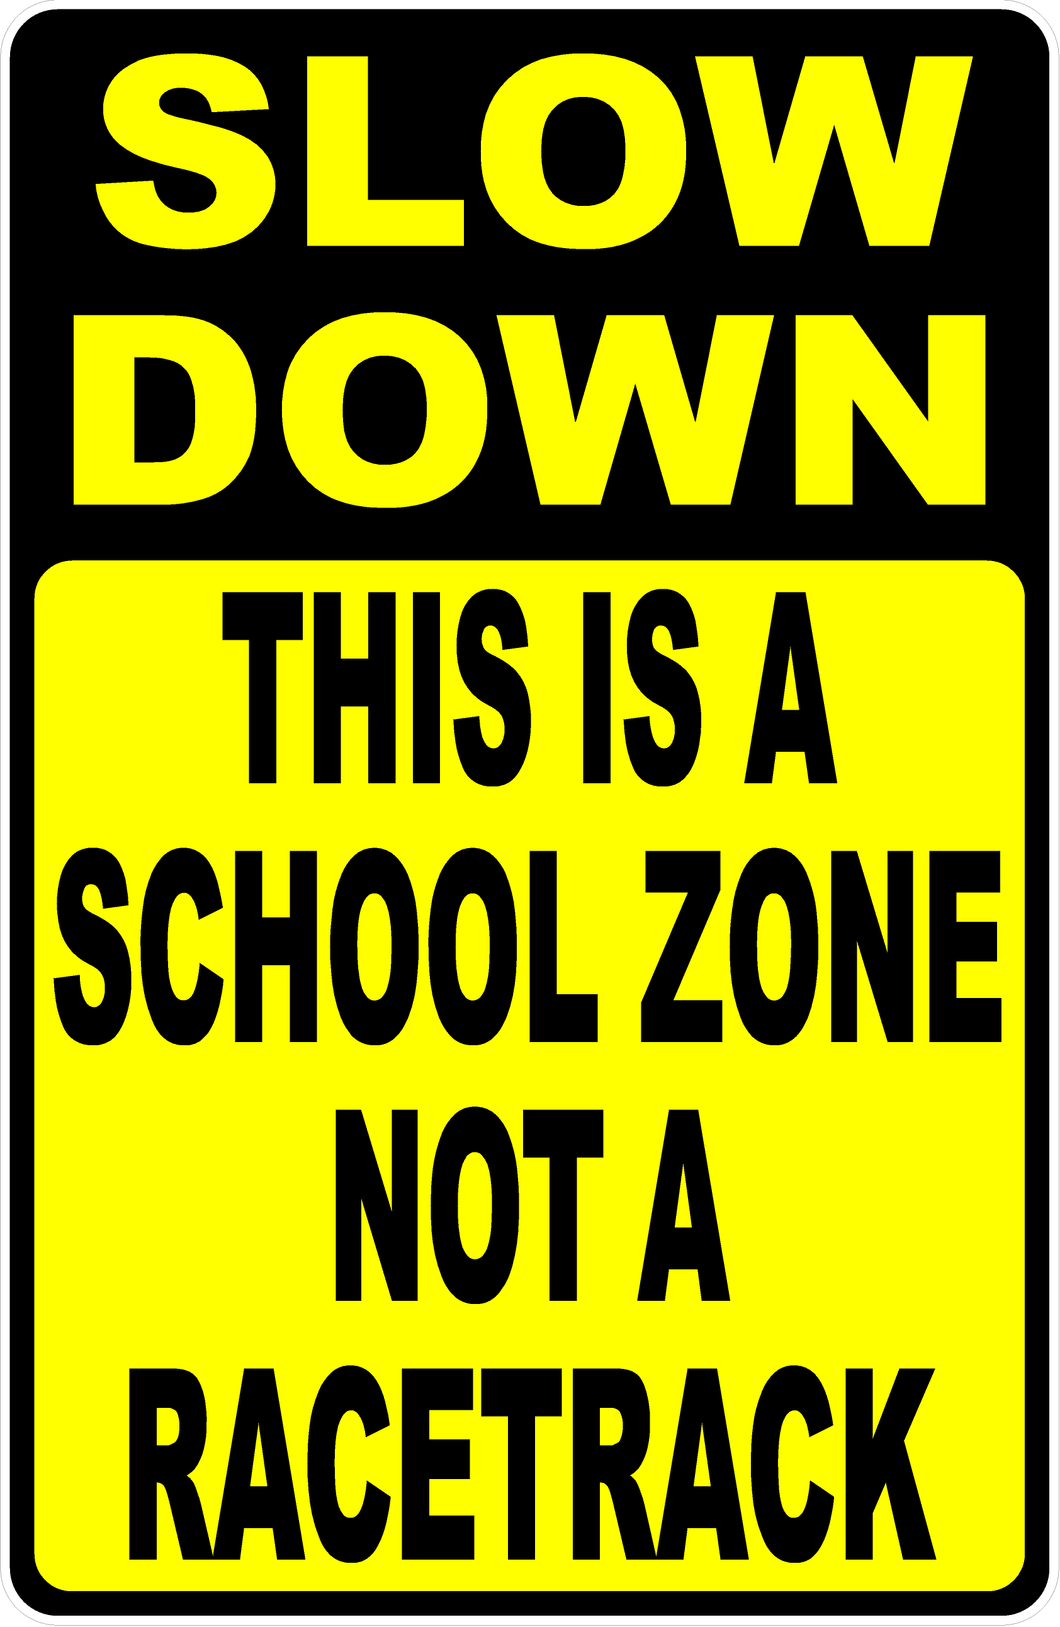 Slow Down This Is A School Zone Not A Racetrack Sign